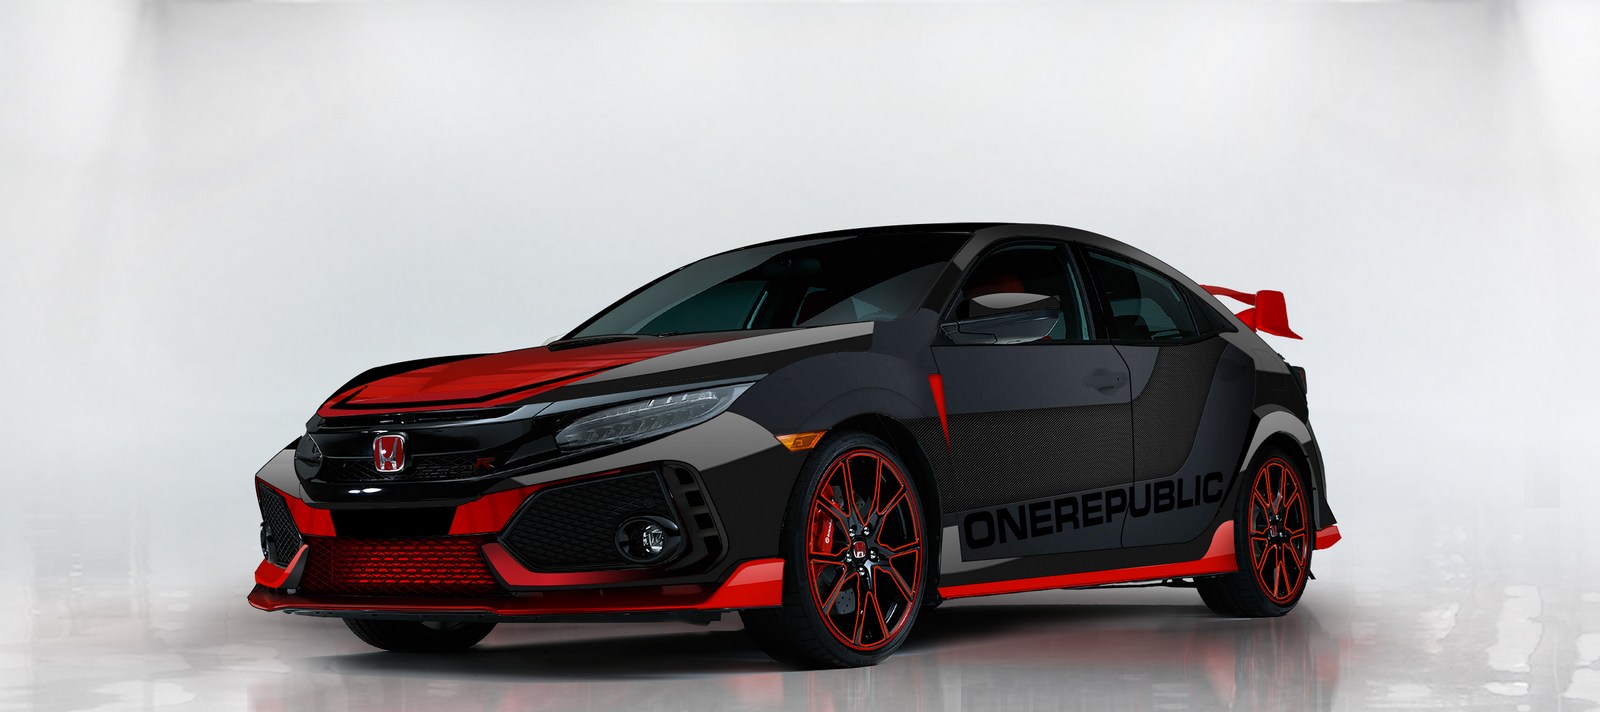 Honda Shows Off A Custom Civic Type R Designed By OneRepublic | Carscoops